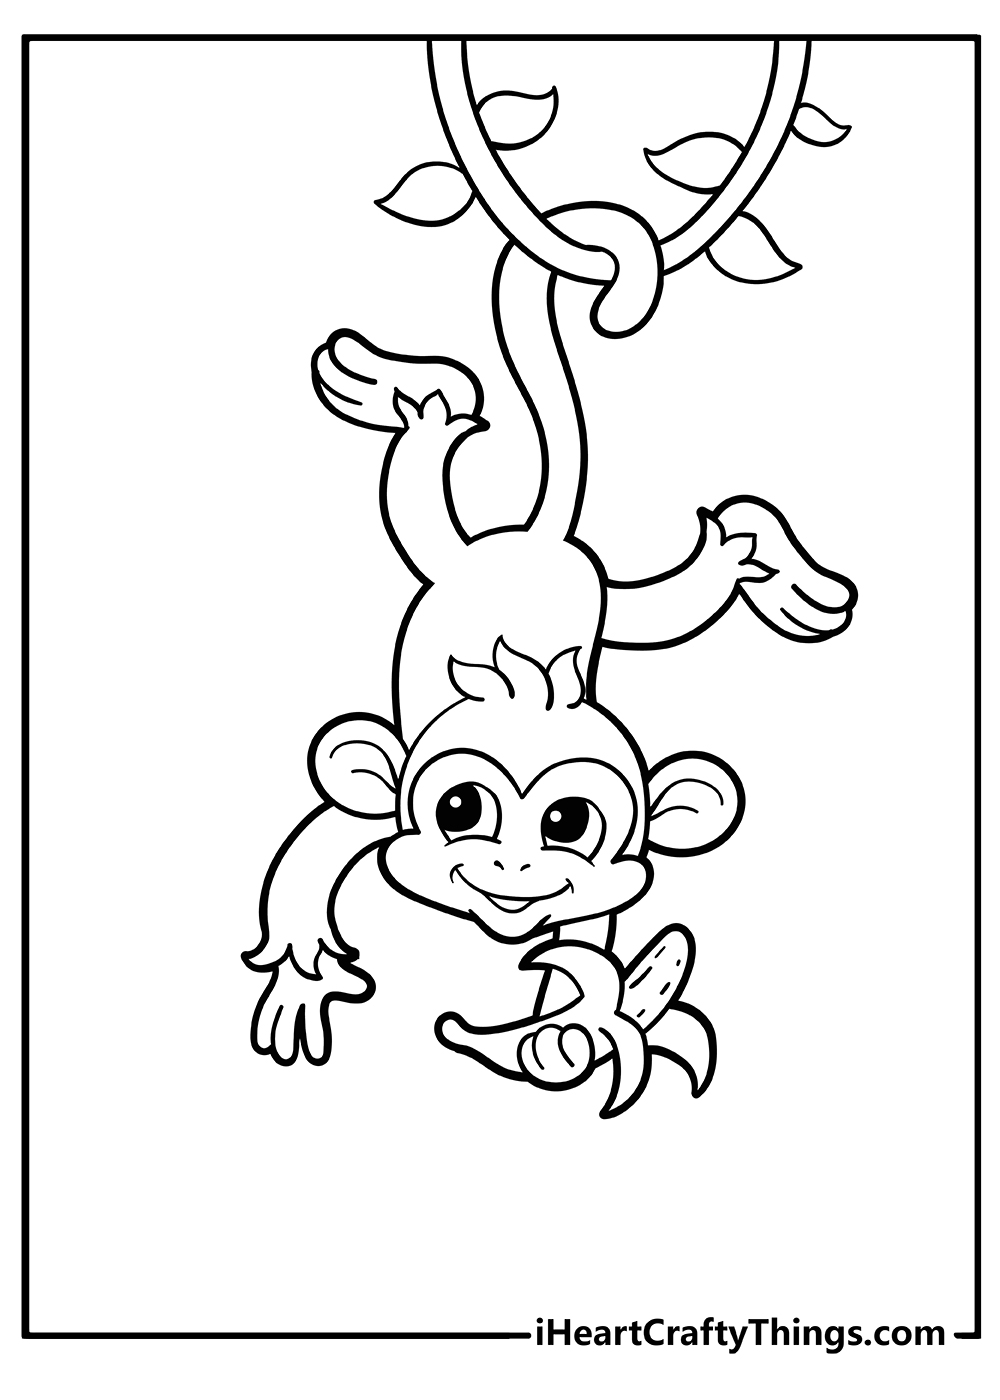 Monkey Coloring Sheet for children free download